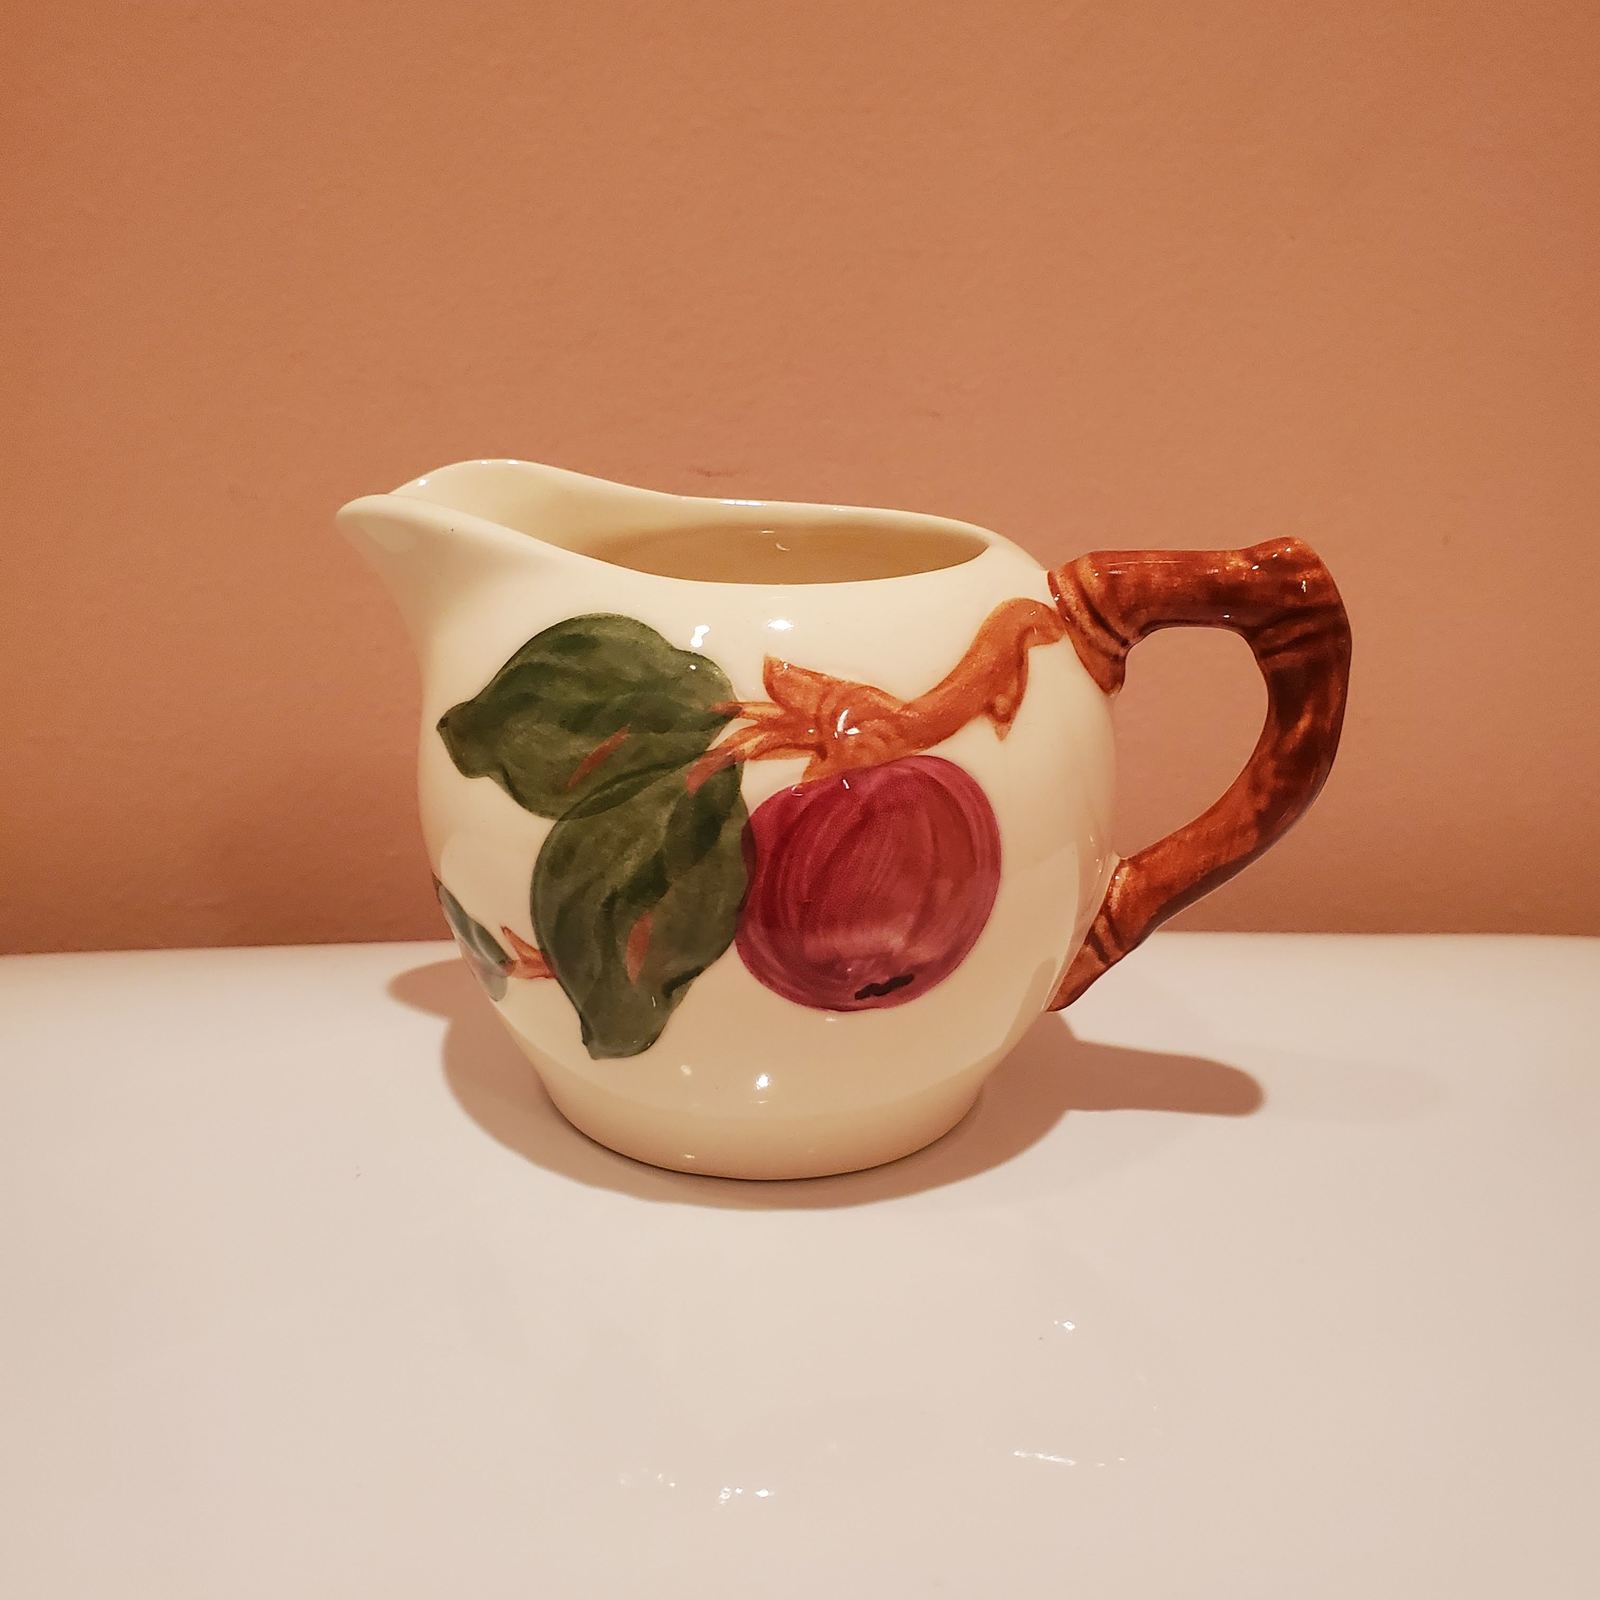 Franciscan Apple Creamer, Vintage 1952, Mid Century MCM, Made in USA Pottery - $24.99